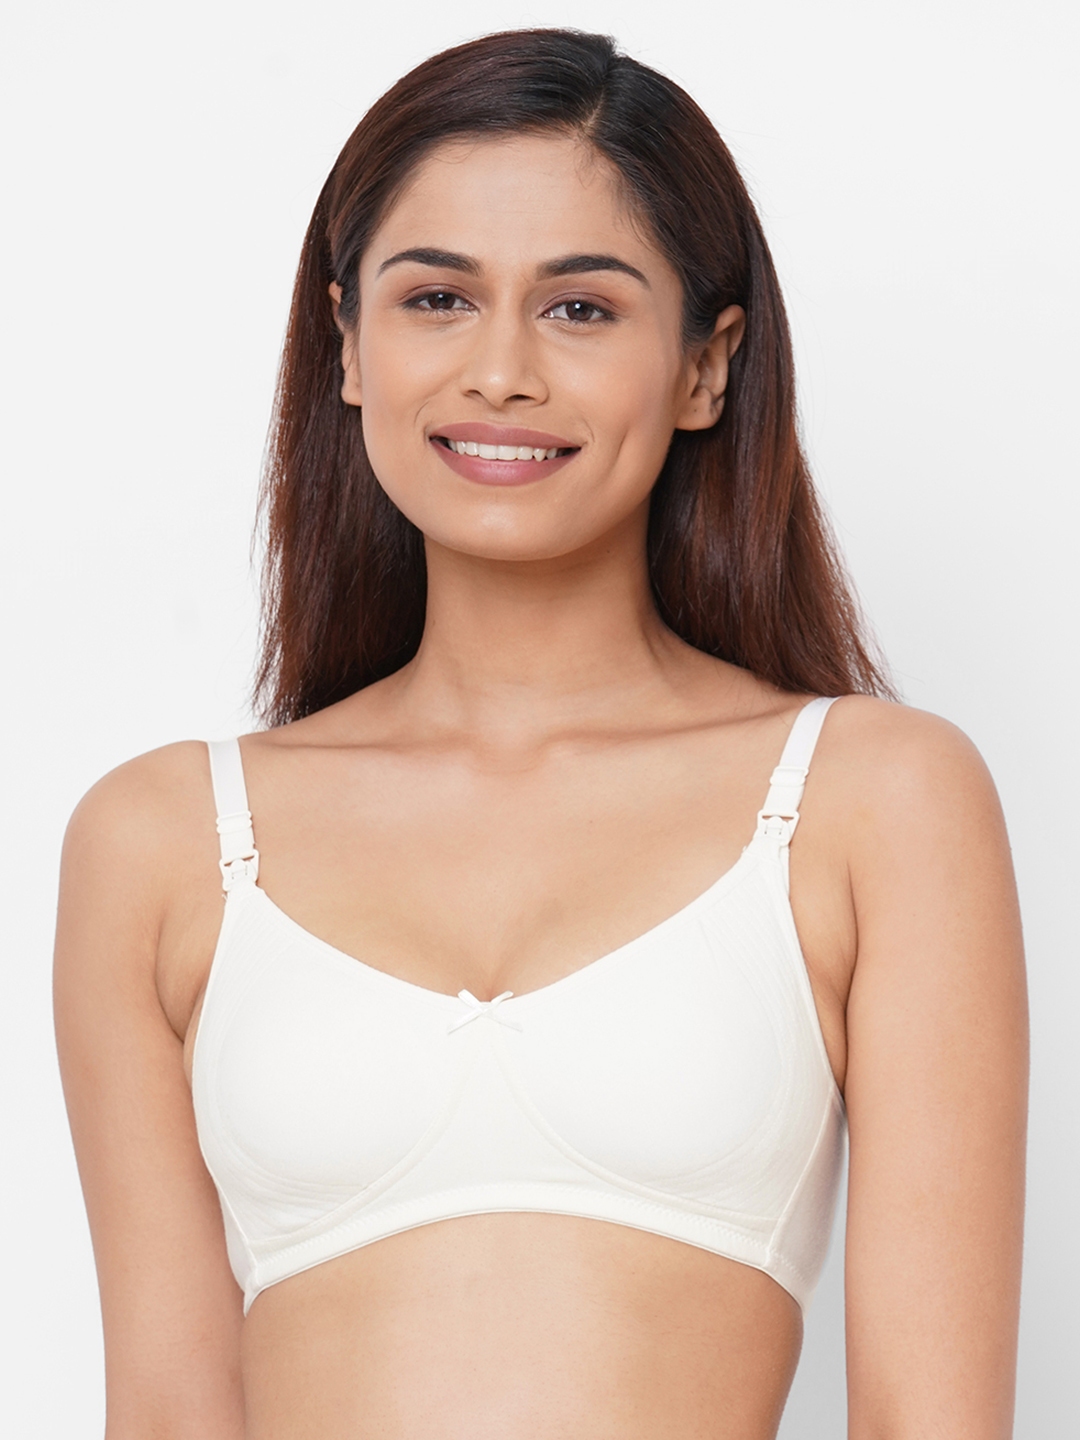  Mylo Care Maternitynursing Bras For Moms Nonwired